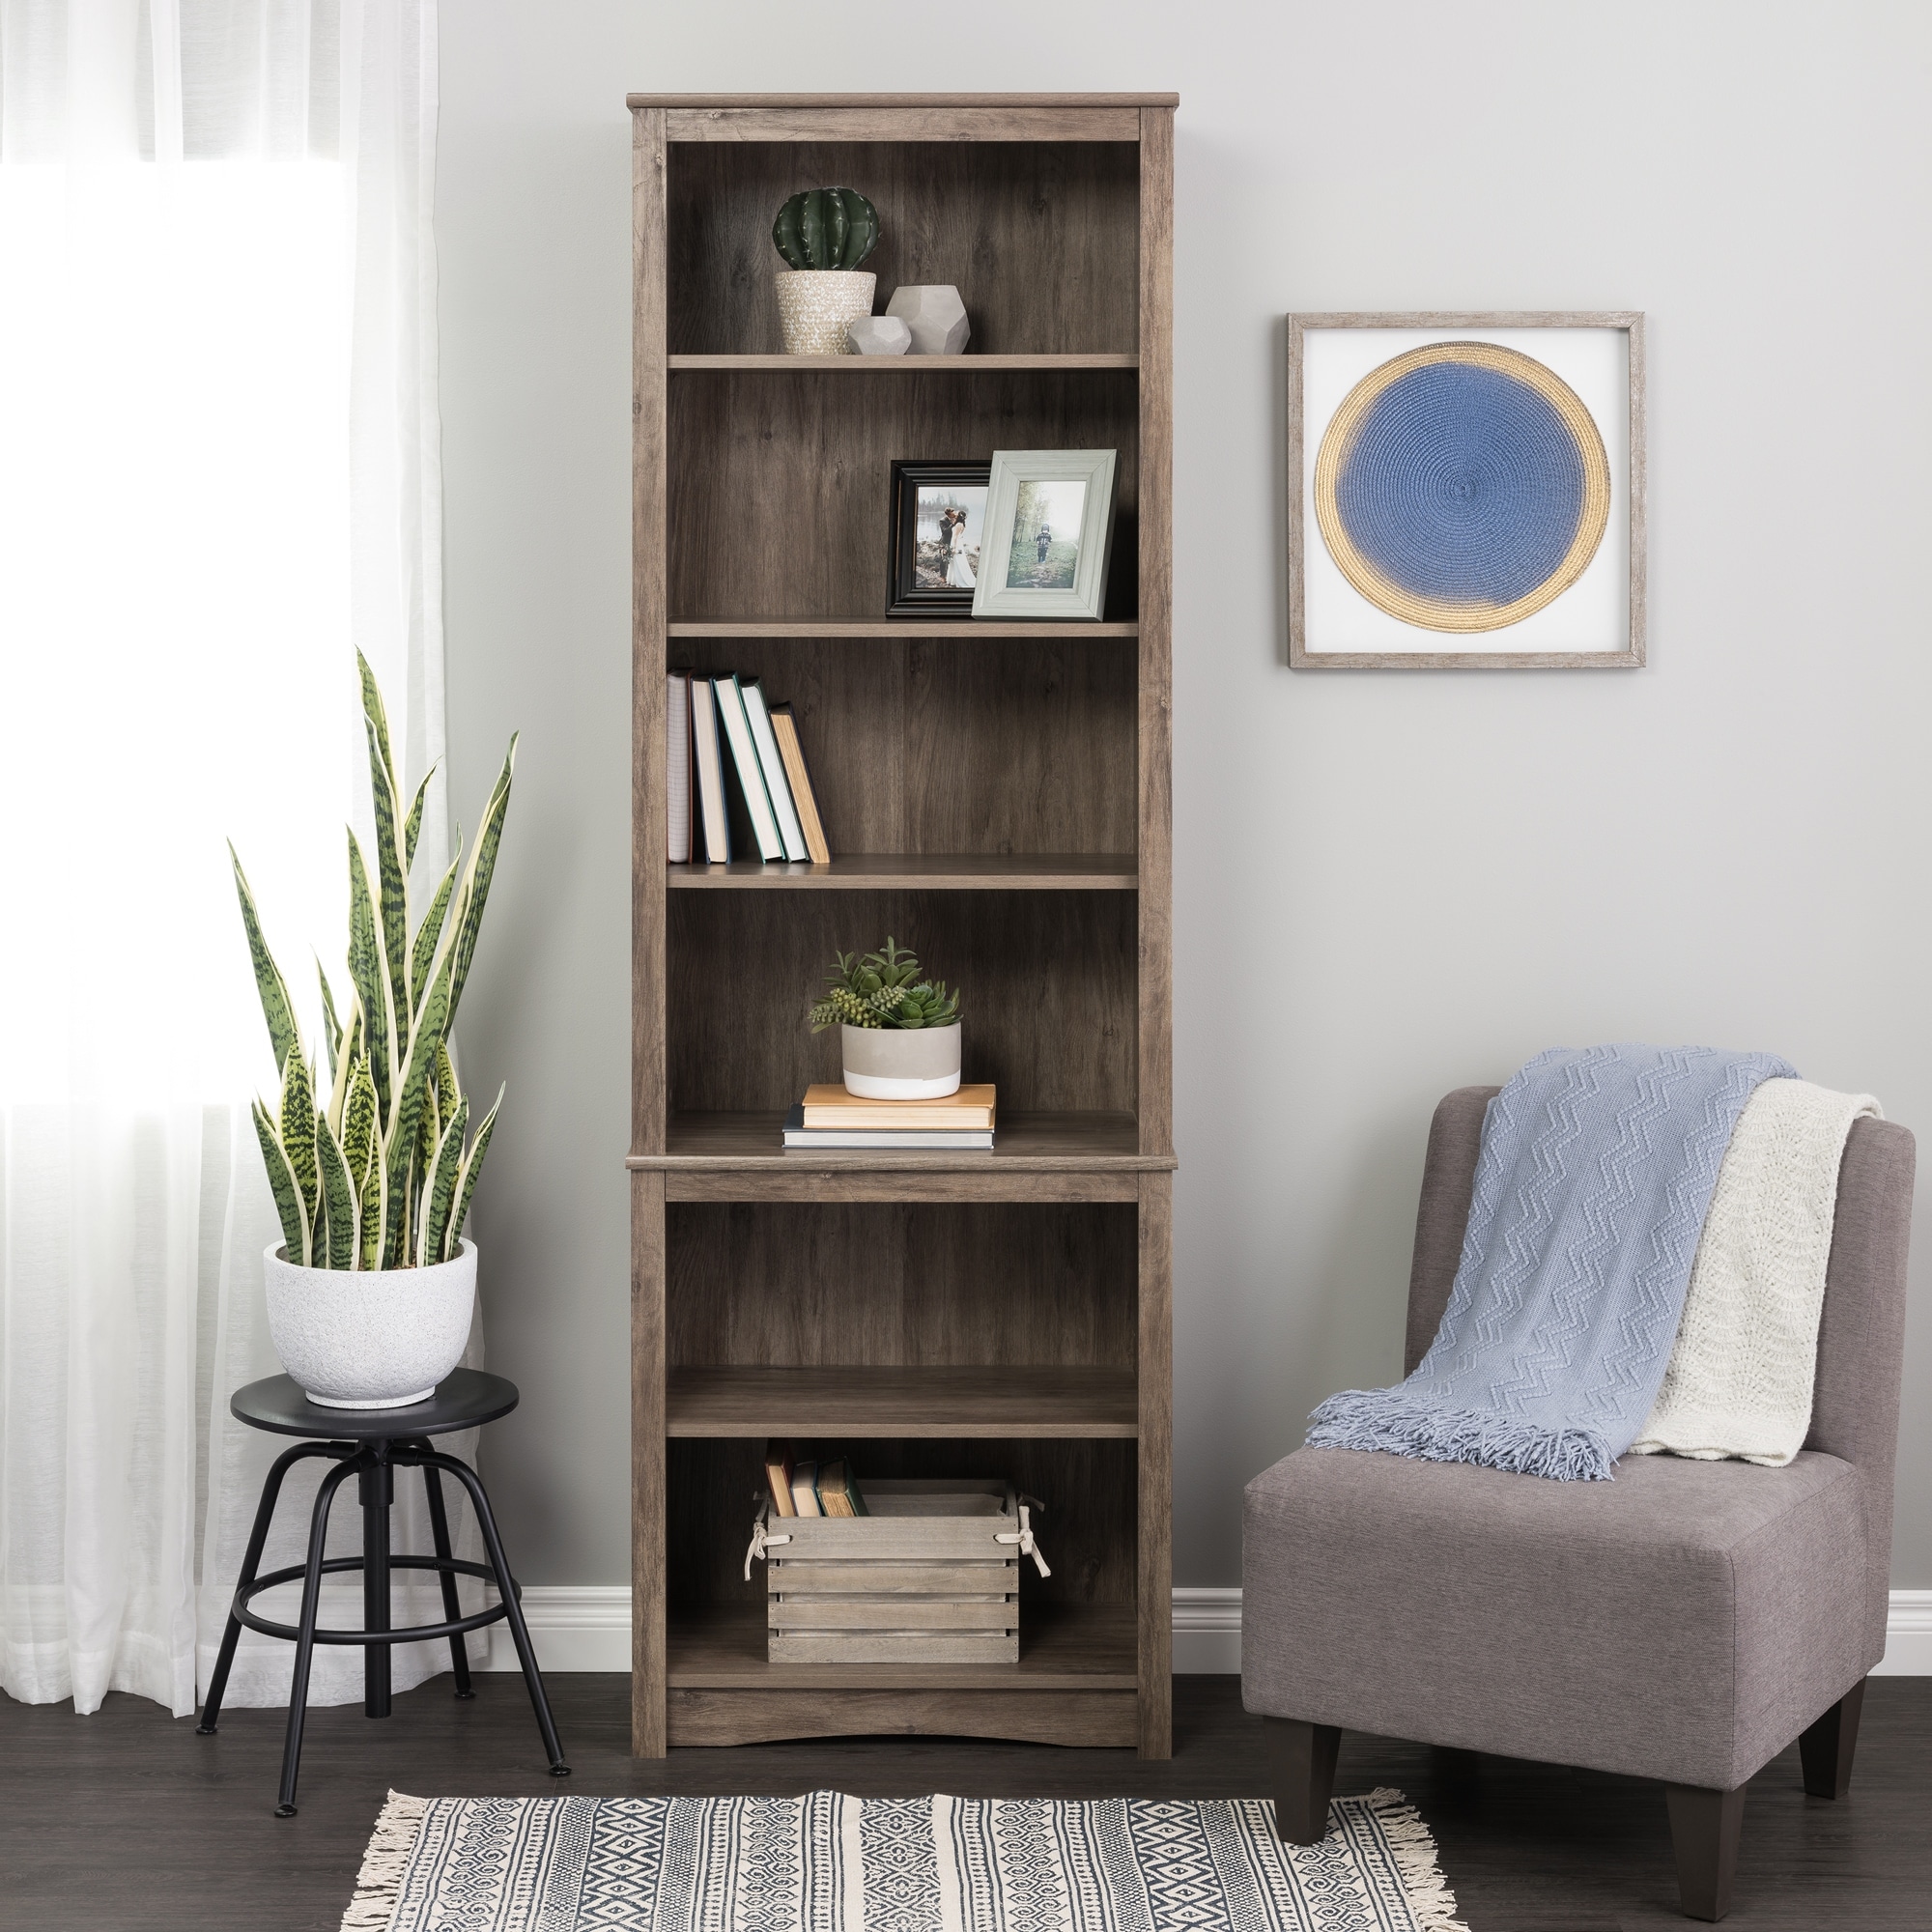 Prepac Tall Bookcase with 2 Shaker Doors - White